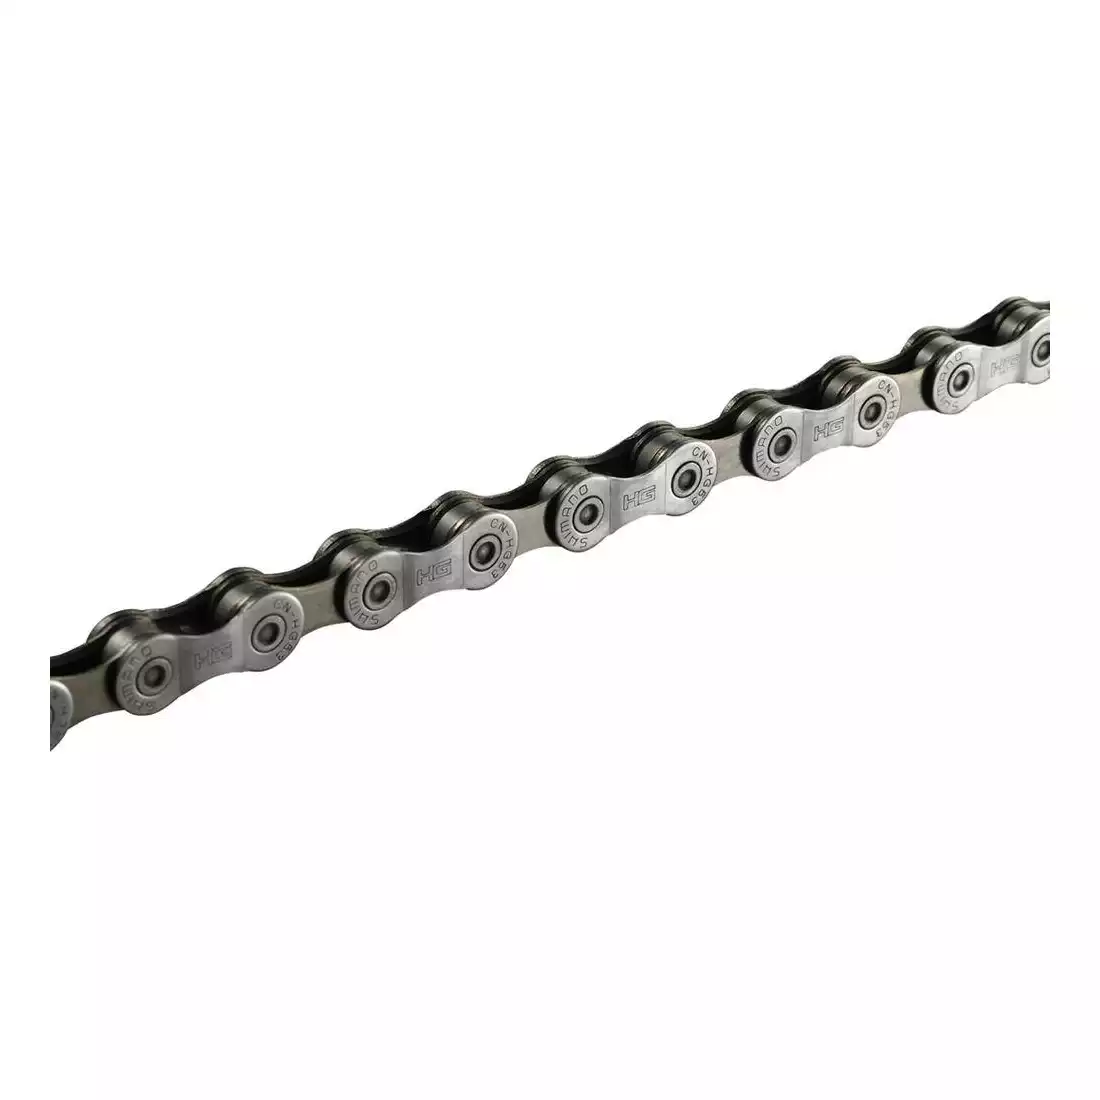 SHIMANO HG-53 bicycle chain 9 speed, 114 links, gray